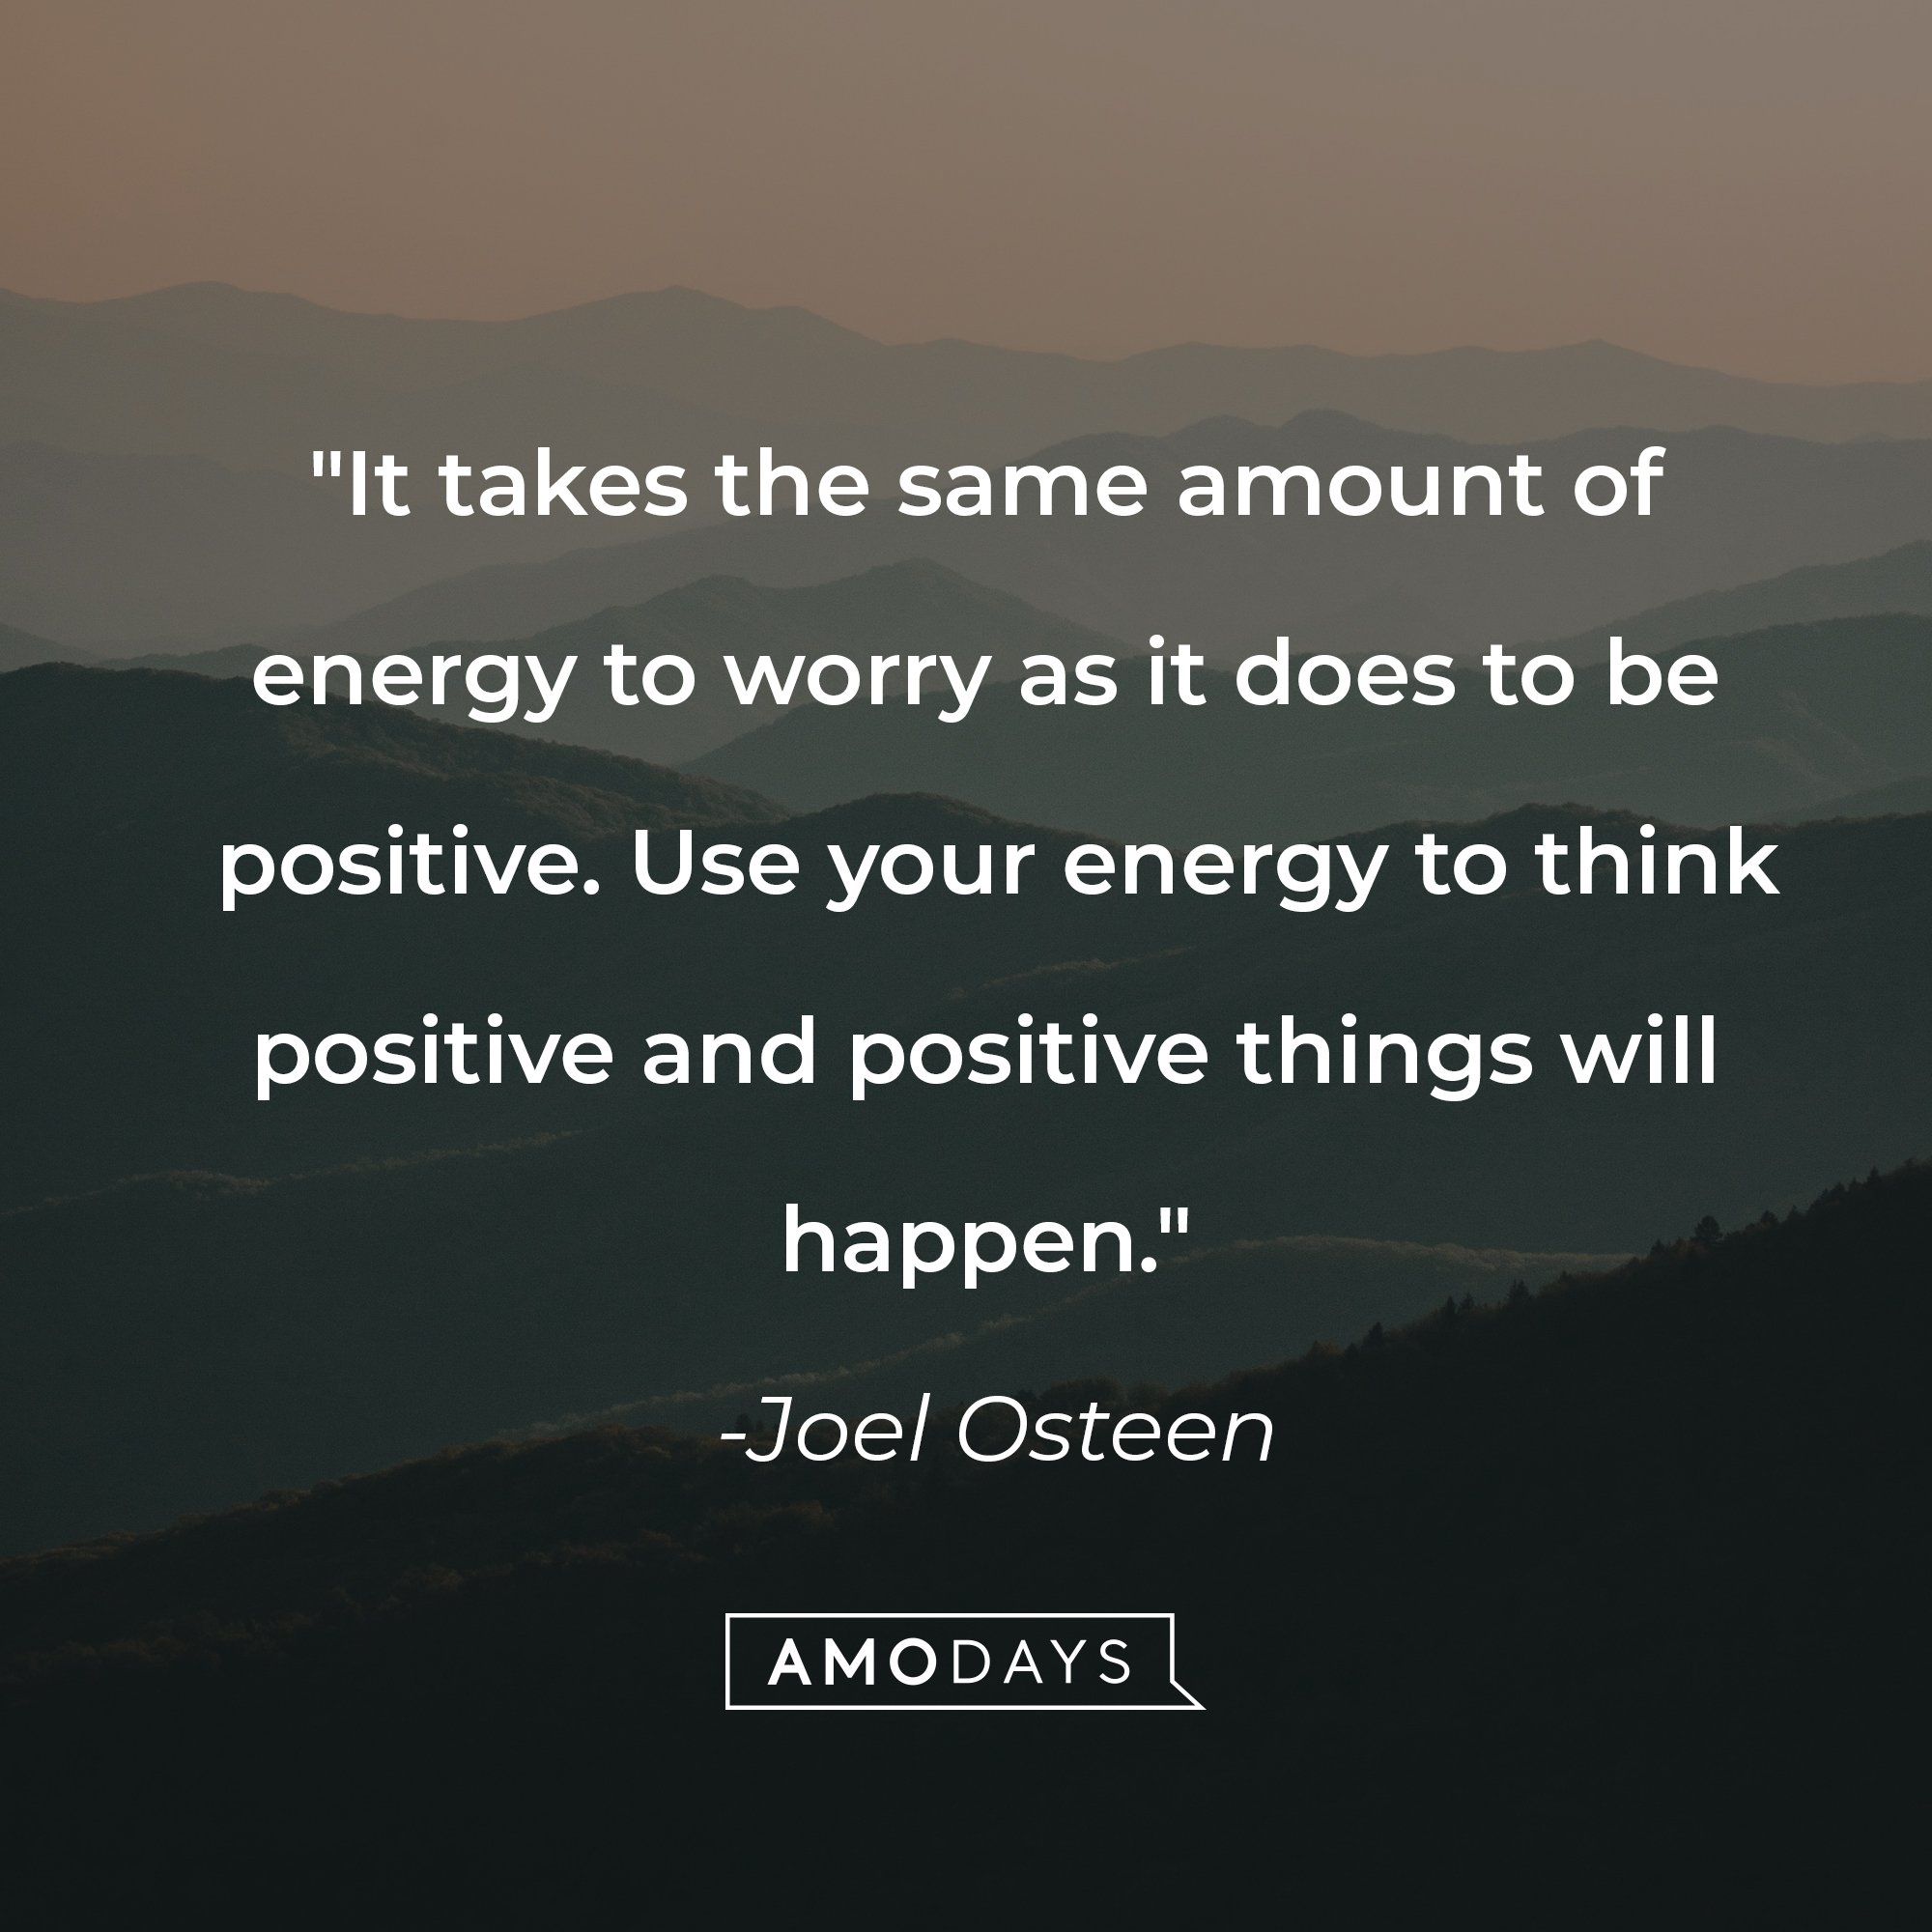 Joel Osteen's quote: "It takes the same amount of energy to worry as it does to be positive. Use your energy to think positive and positive things will happen." | Image: AmoDays